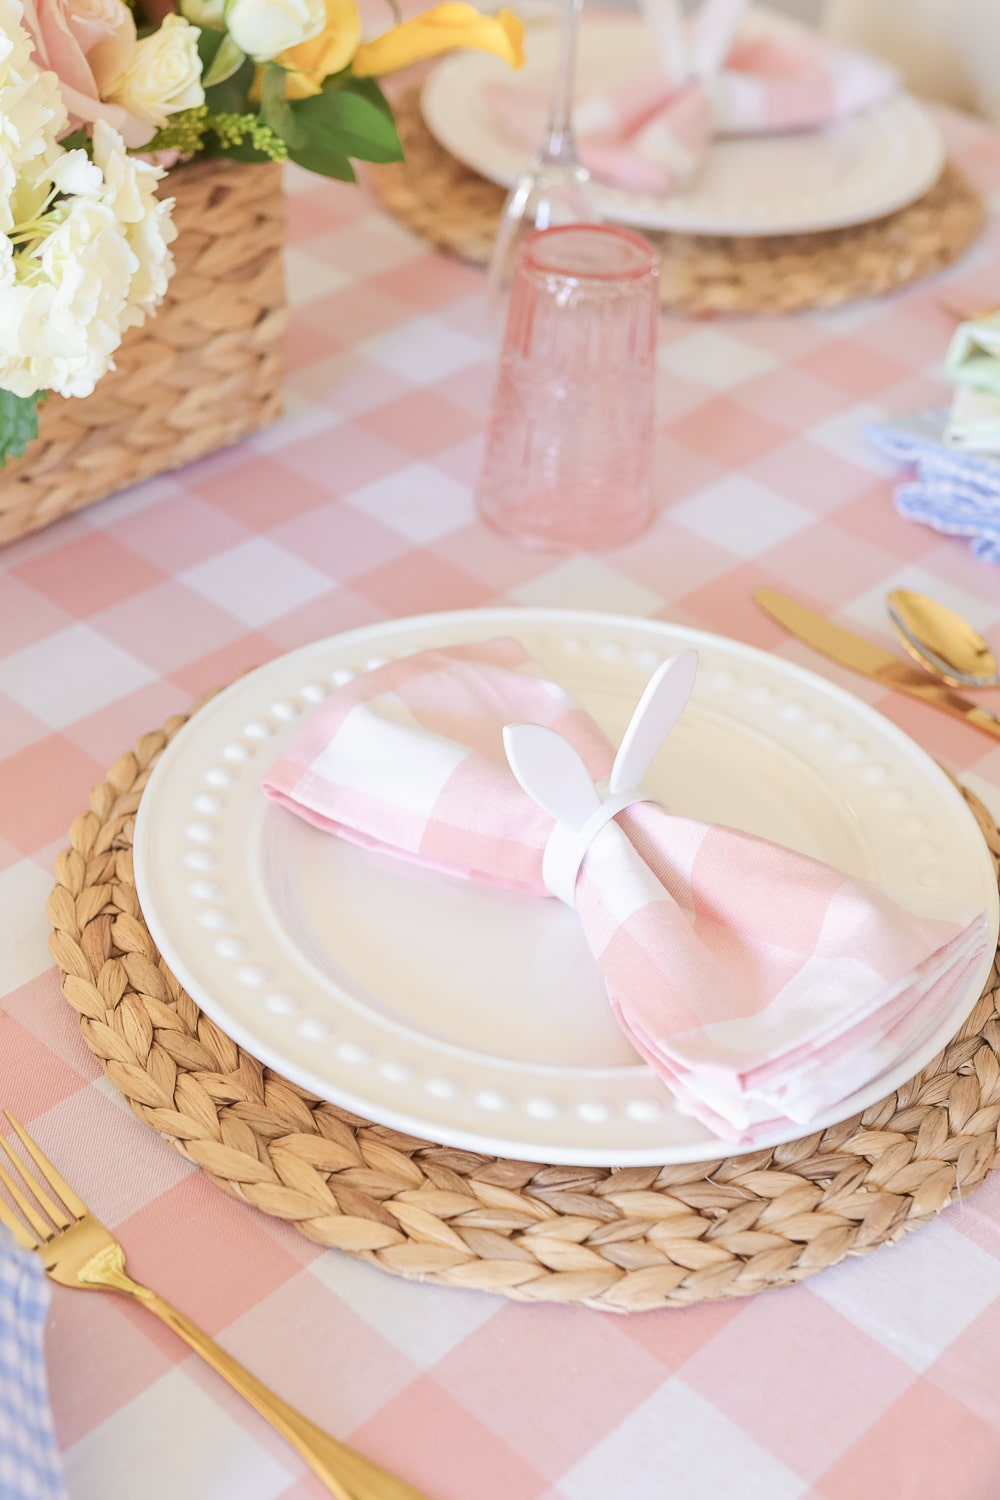 Cute Easter dinner table setting ideas from blogger Stephanie Ziajka on Diary of a Debutante